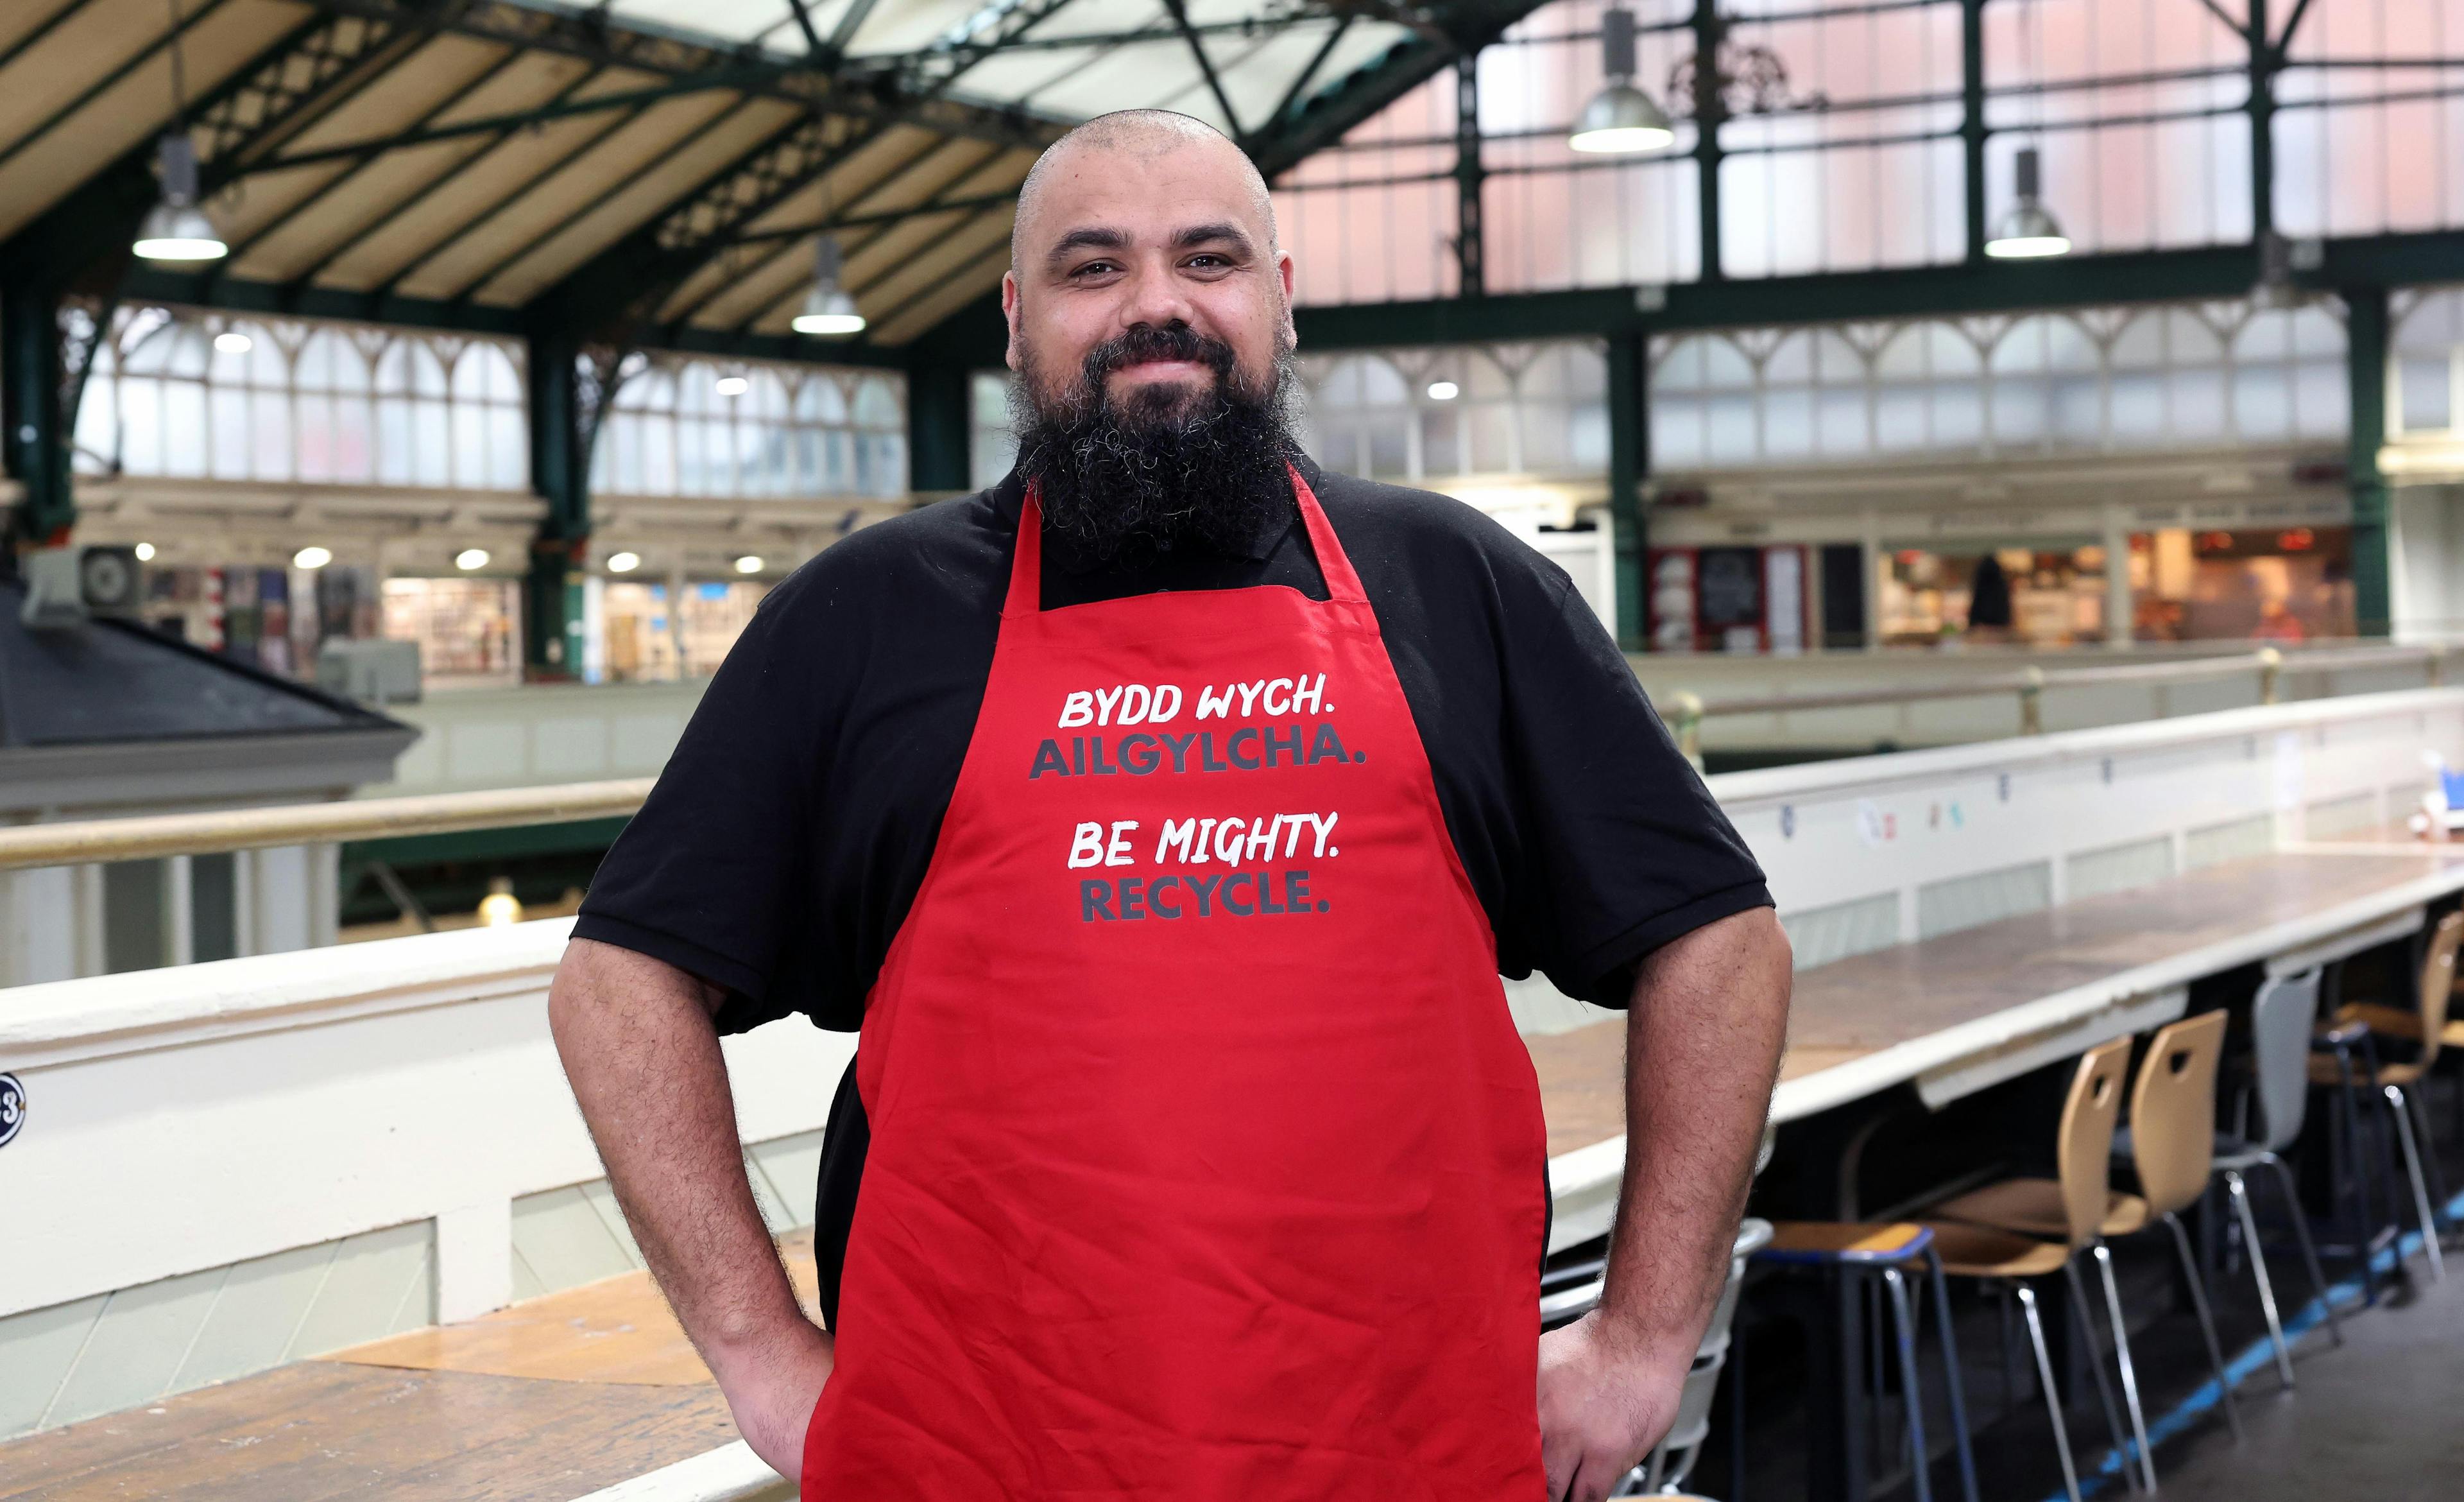 Chef Chris Roberts standing in Cardiff Market wearing a red apron with his hands on his hips.